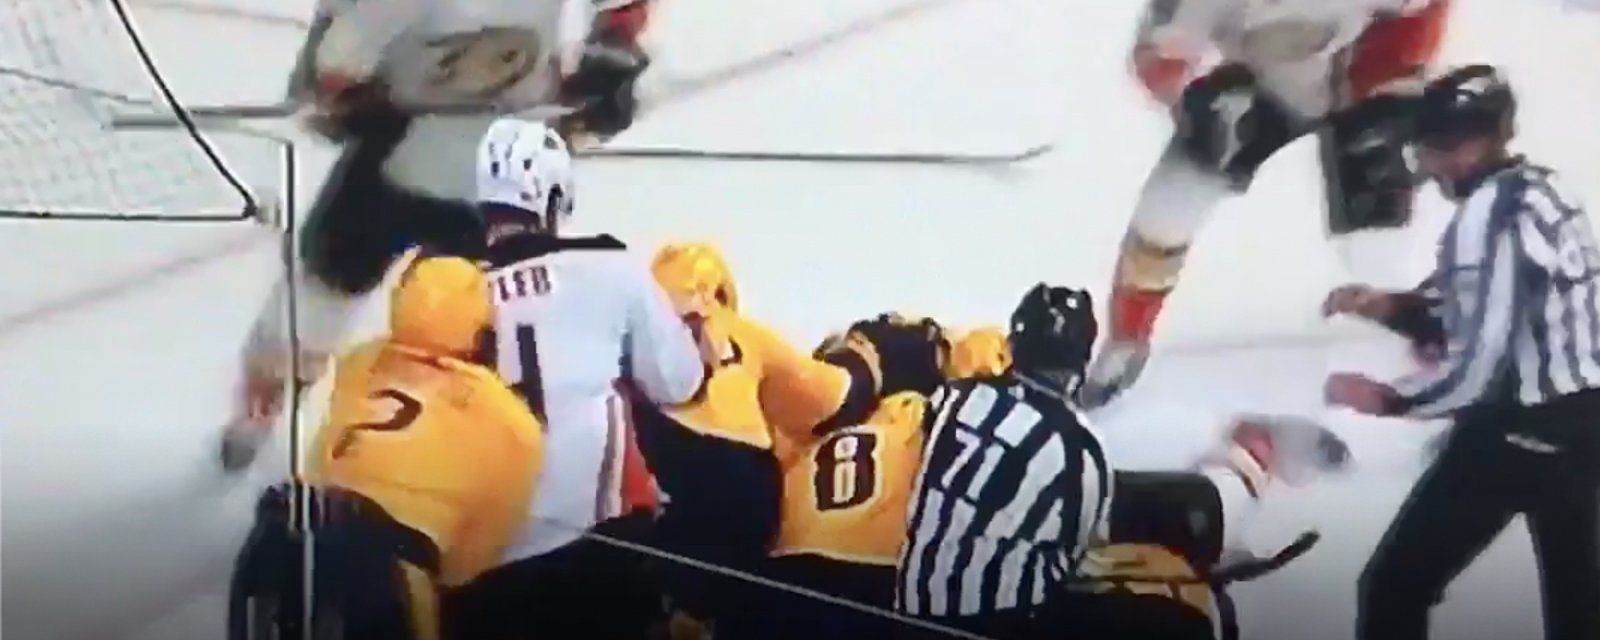 Greatest stick lift of all time, goal, and massive brawl all in one play!